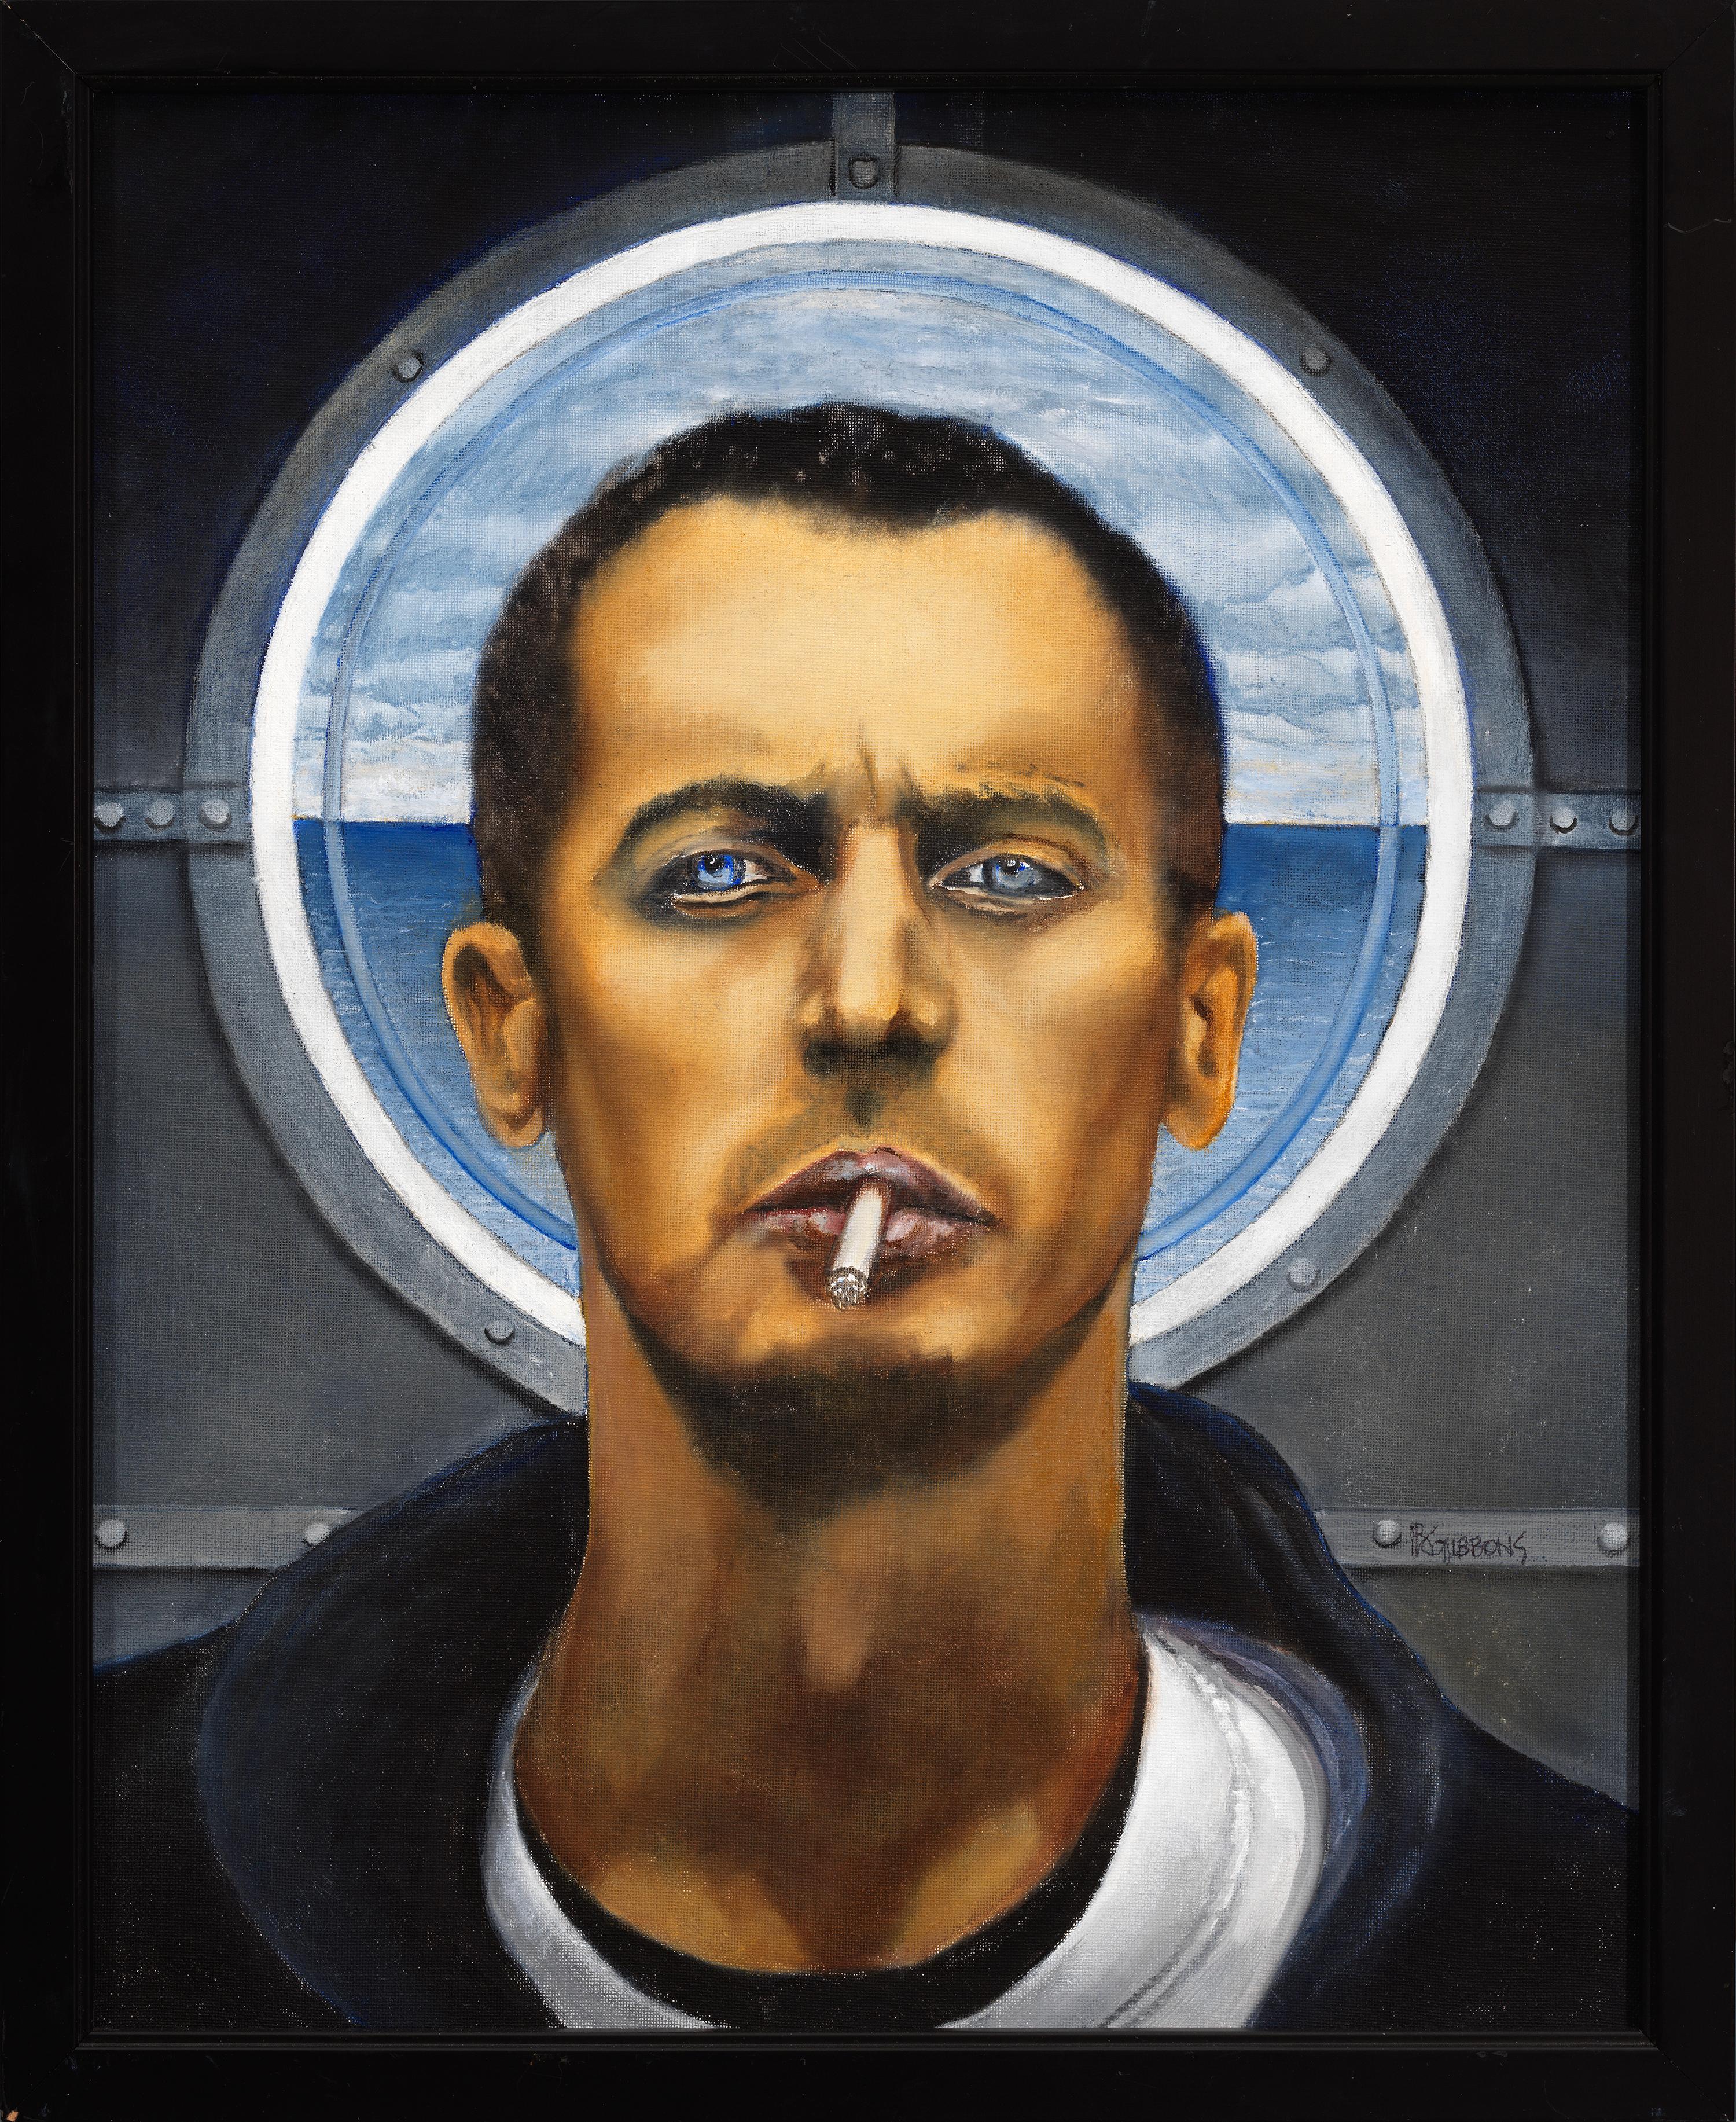 Richard Gibbons Portrait Painting - Querelle - Man with Piercing Blue Eyes, Smoking, Original Oil Painting